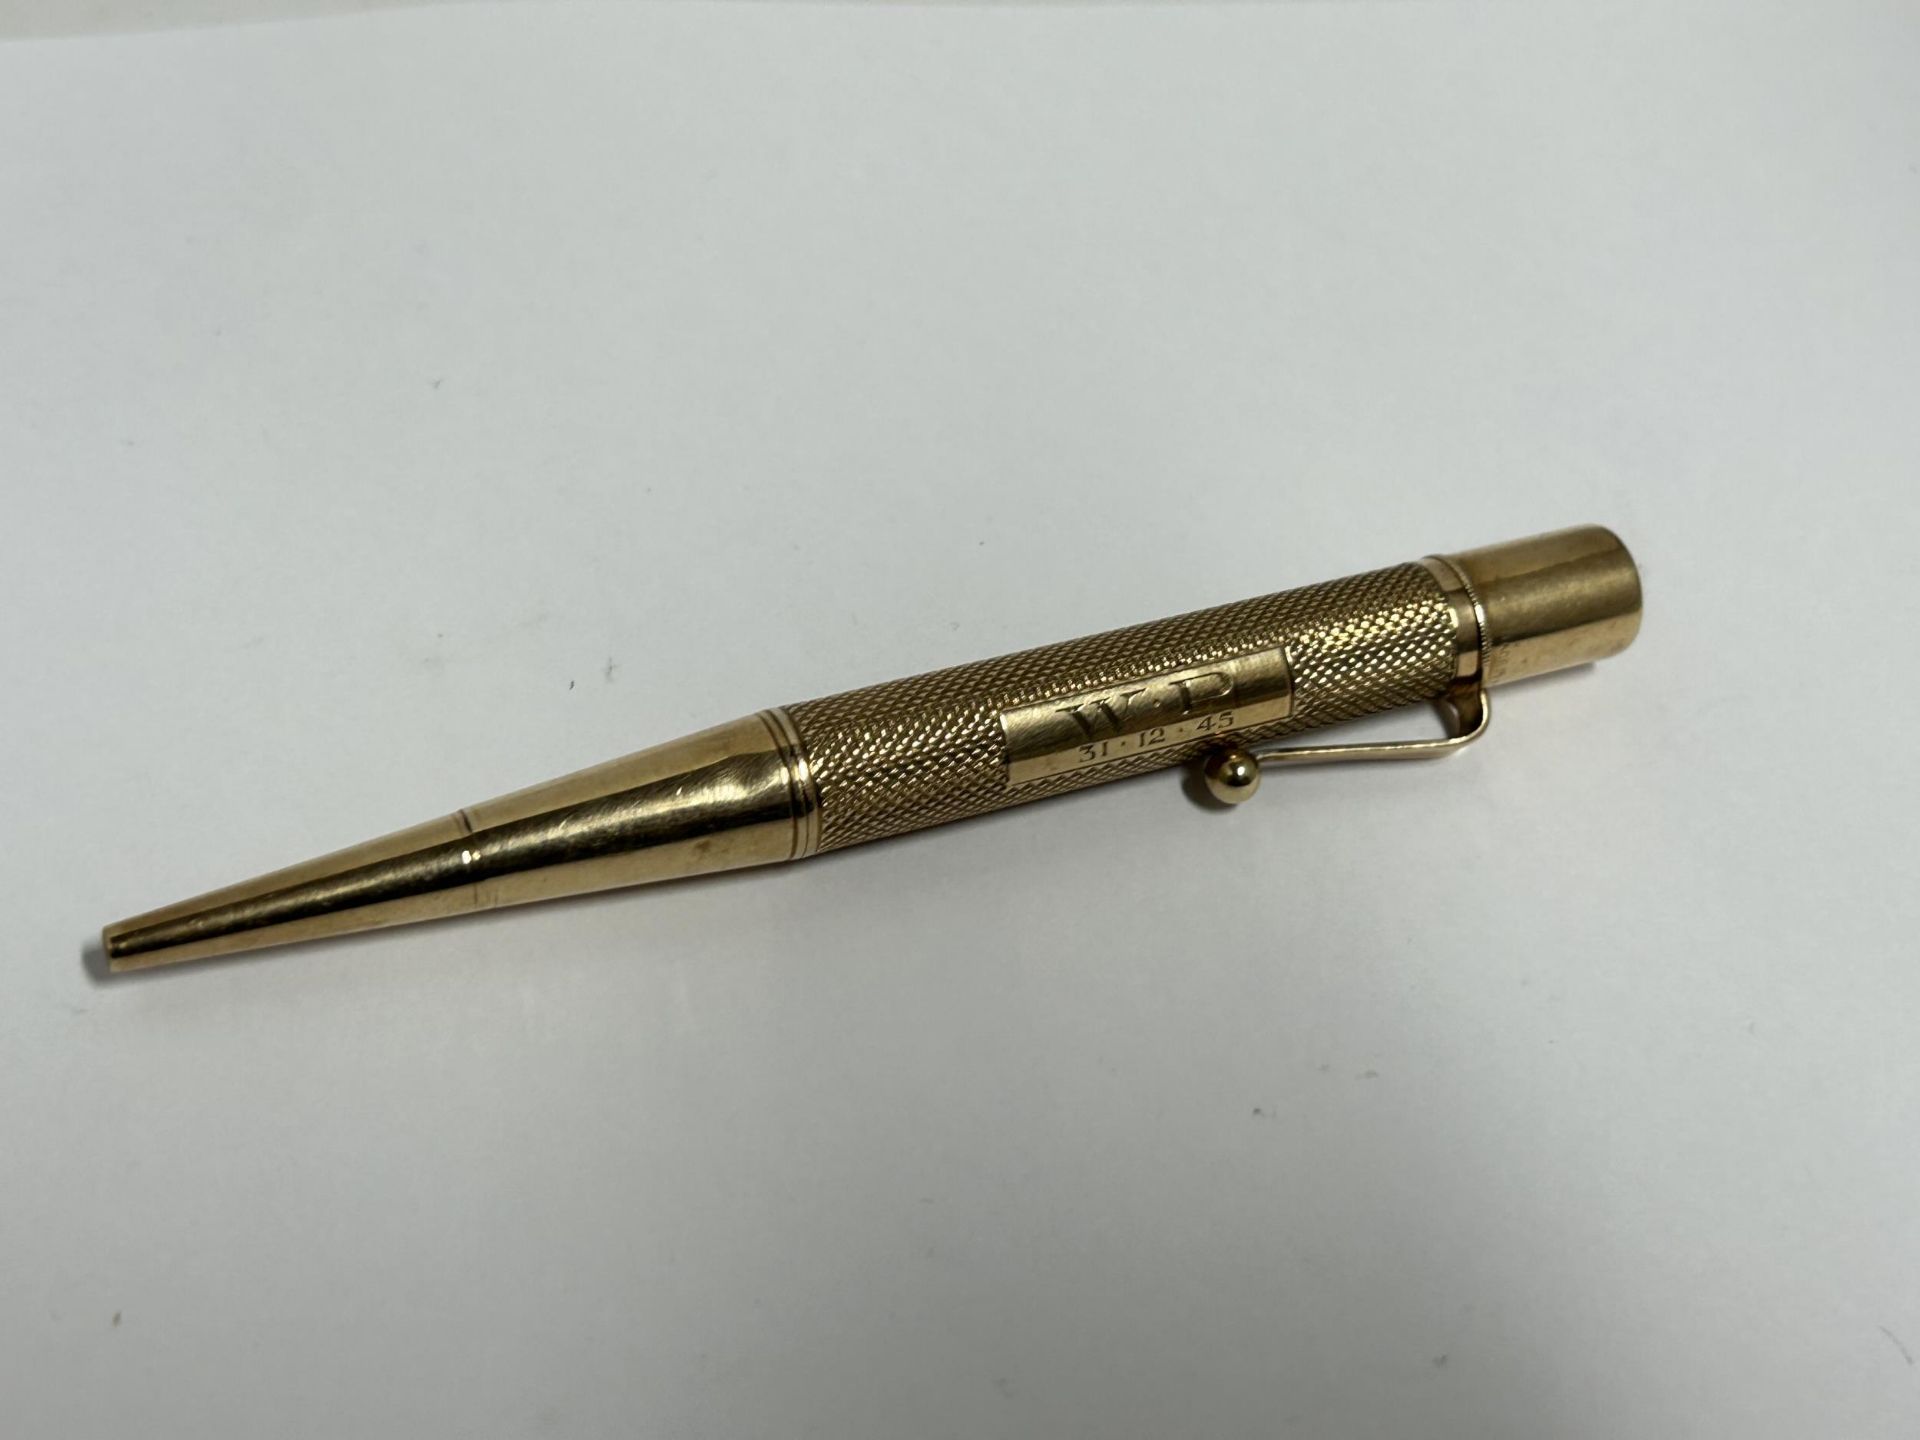 A HALLMARKED 9CT YELLOW GOLD BAKERS POINTER PROPELLING PENCIL GROSS WEIGHT 33.13 GRAMS - Image 5 of 6